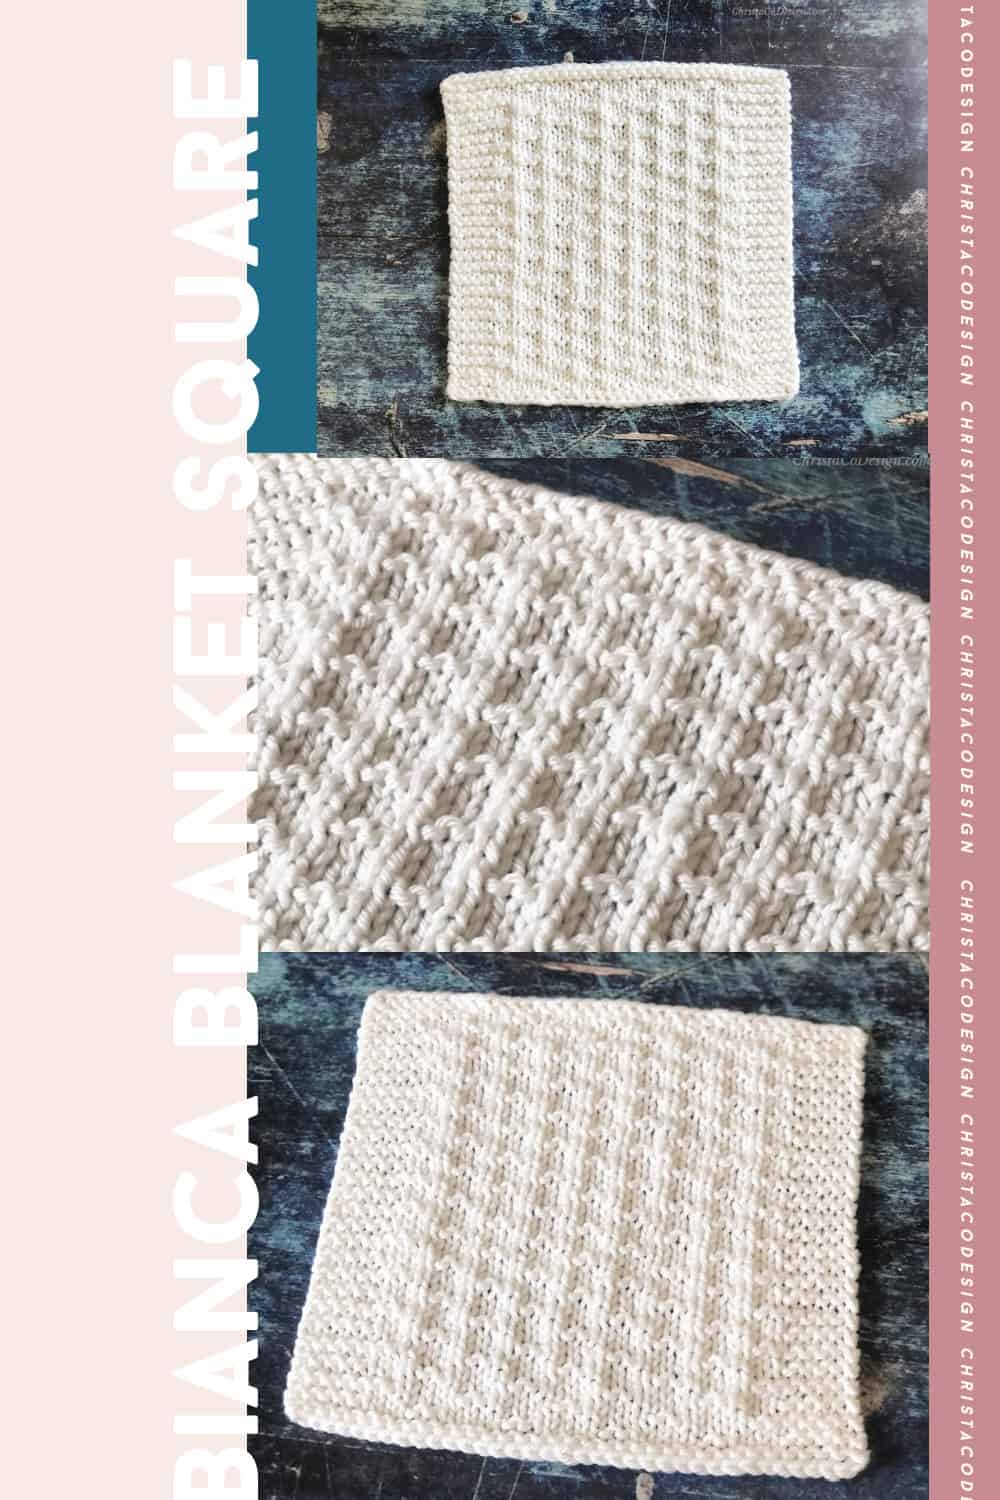 Three pictures of a white texture knit blanket square stacked.